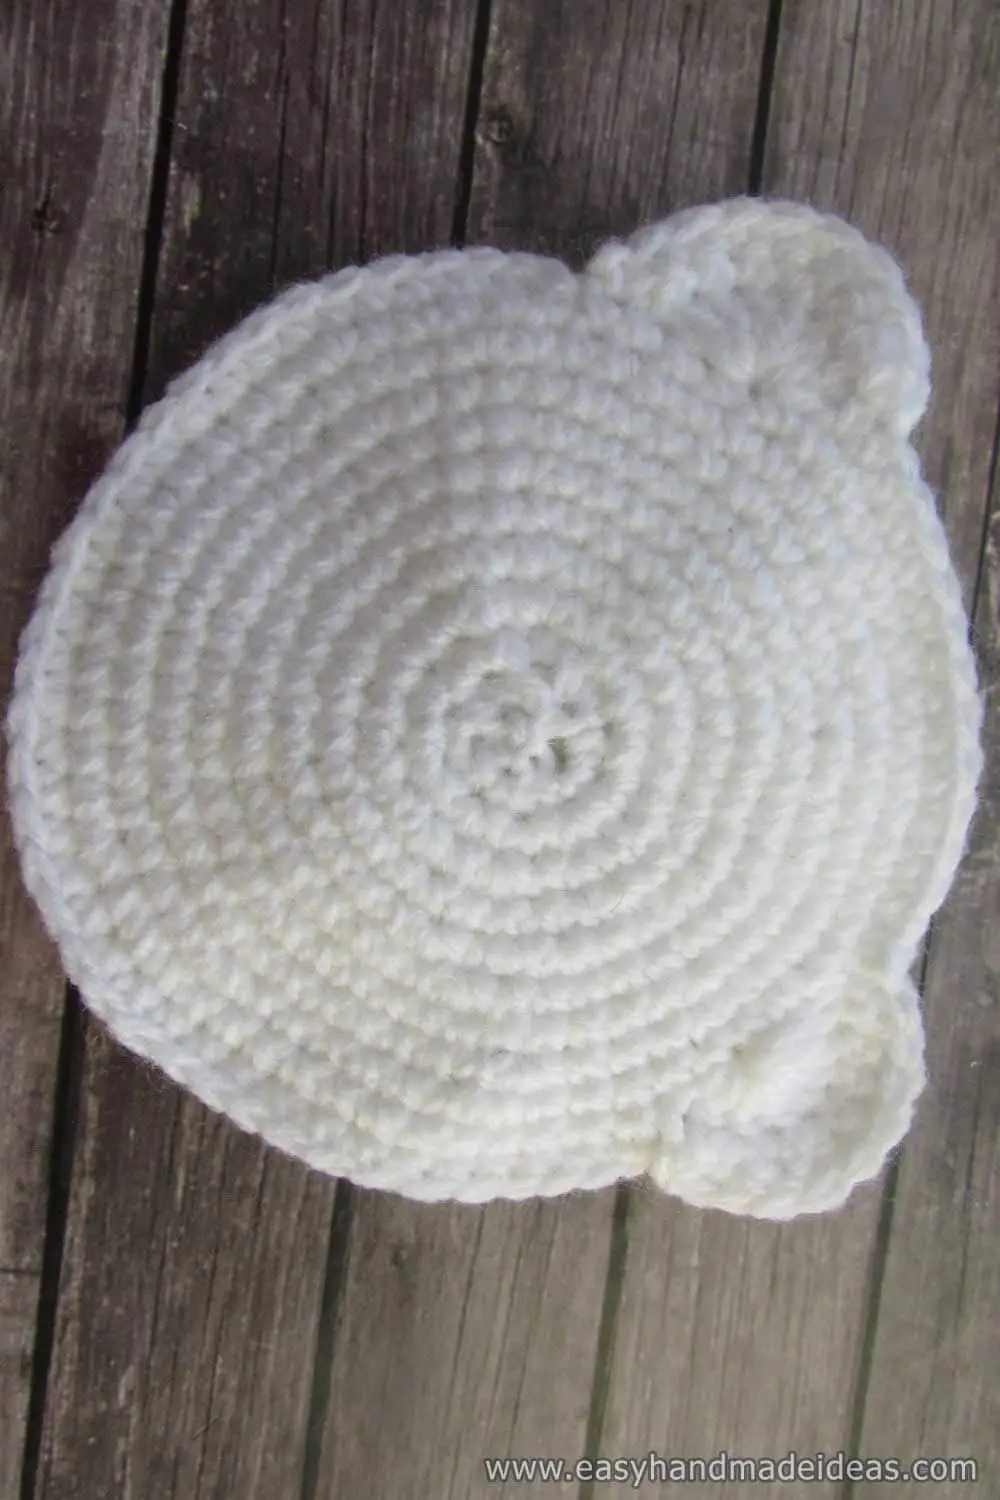 Two Circles are Crocheted